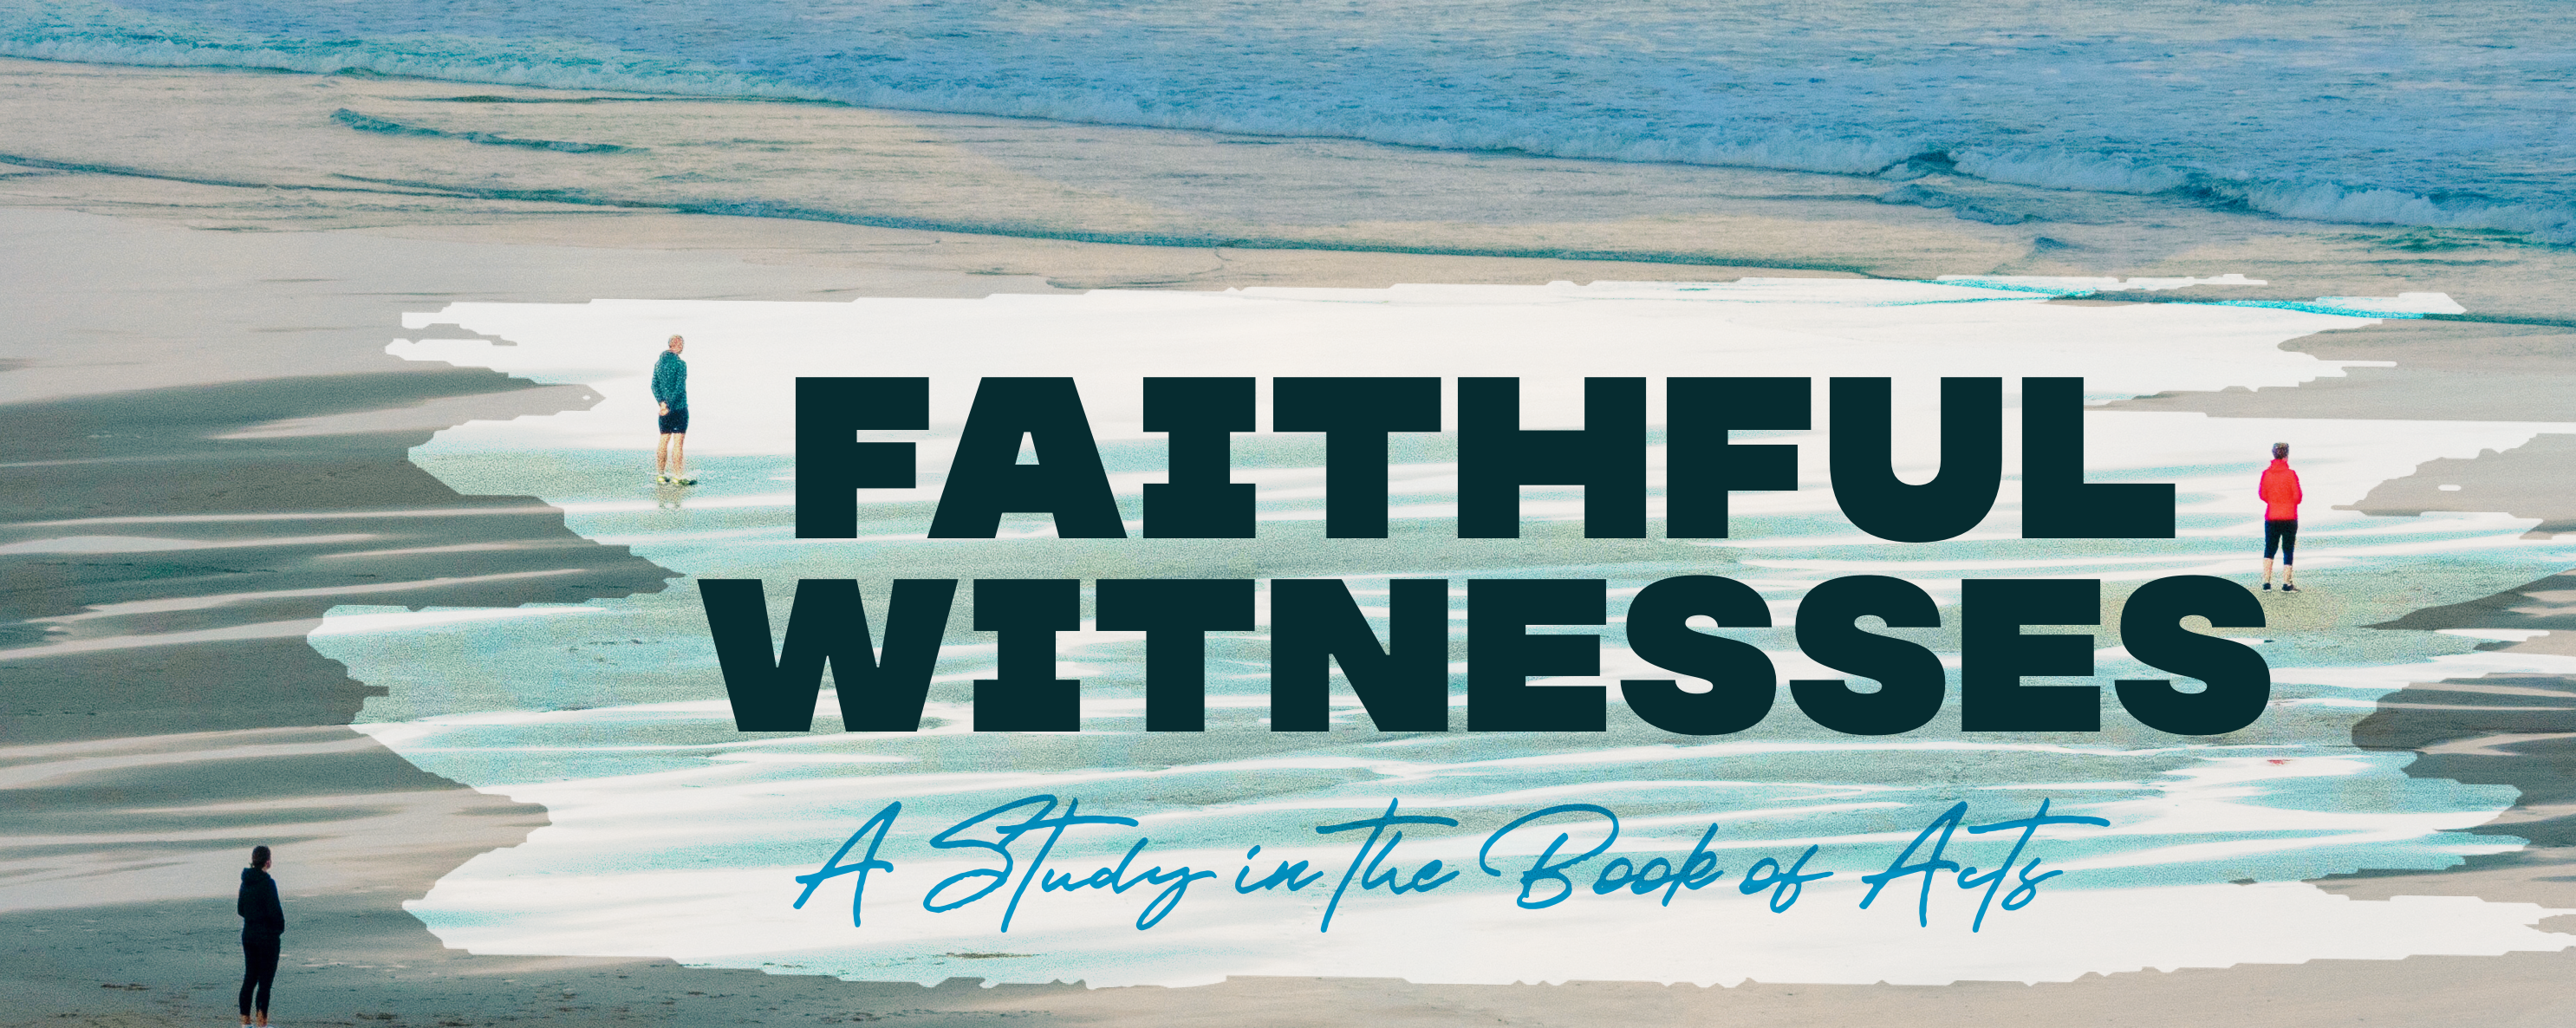 Faithful Witnesses: A Study in the Book of Acts banner